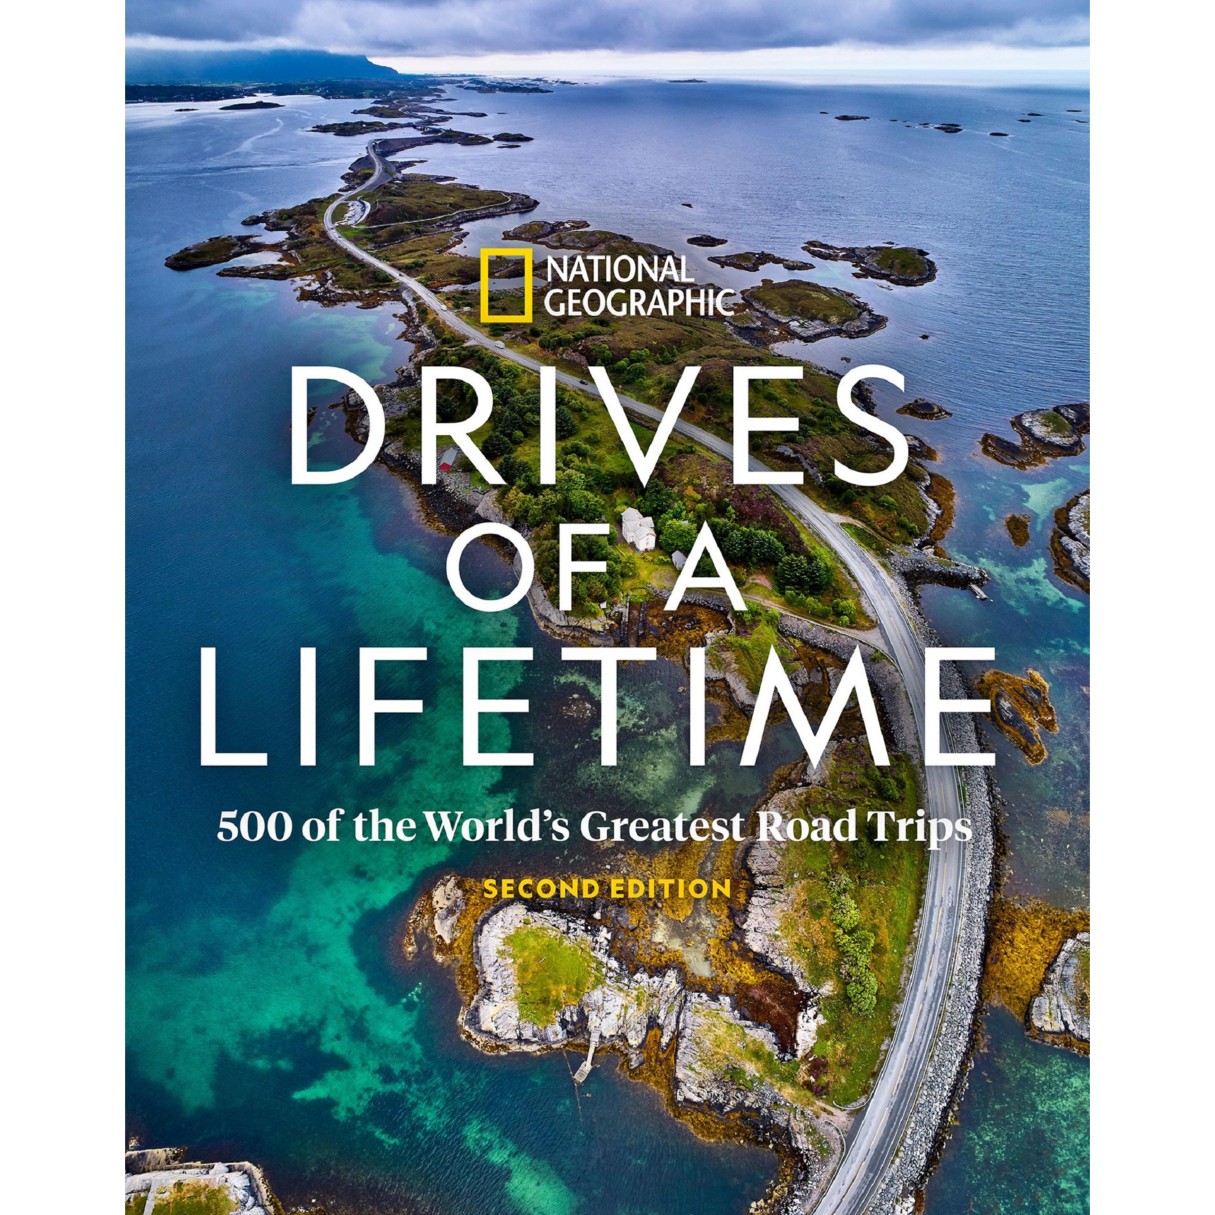 Drives of a Lifetime: 500 of the World's Greatest Road Trips Book – Second Edition – National Geographic